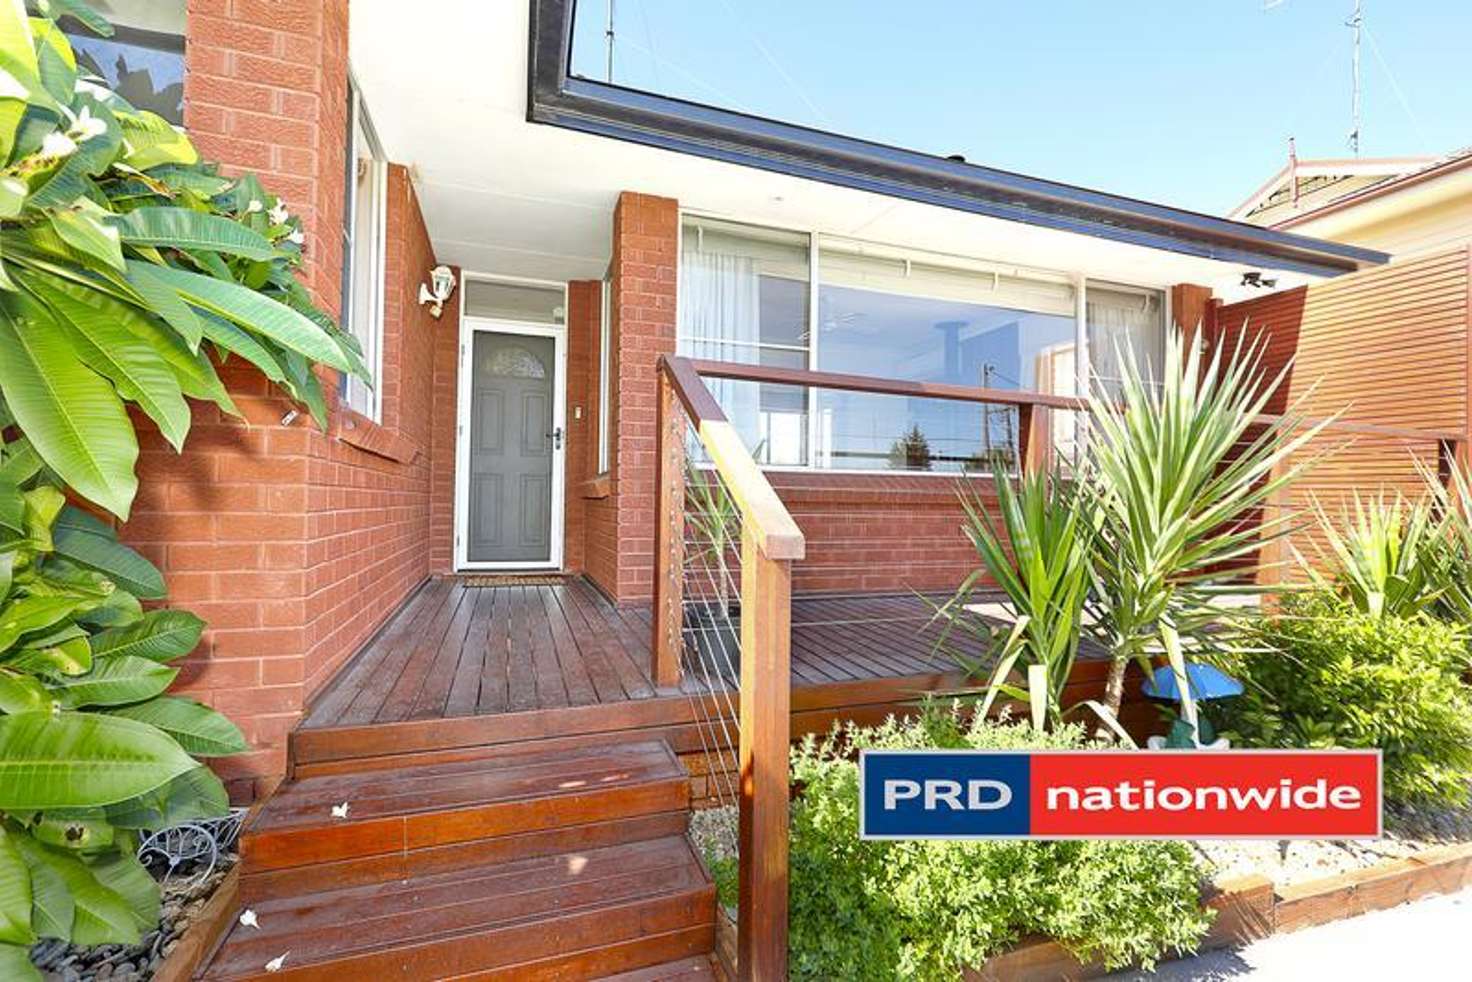 Main view of Homely house listing, 12 Hillcrest Avenue, Penrith NSW 2750